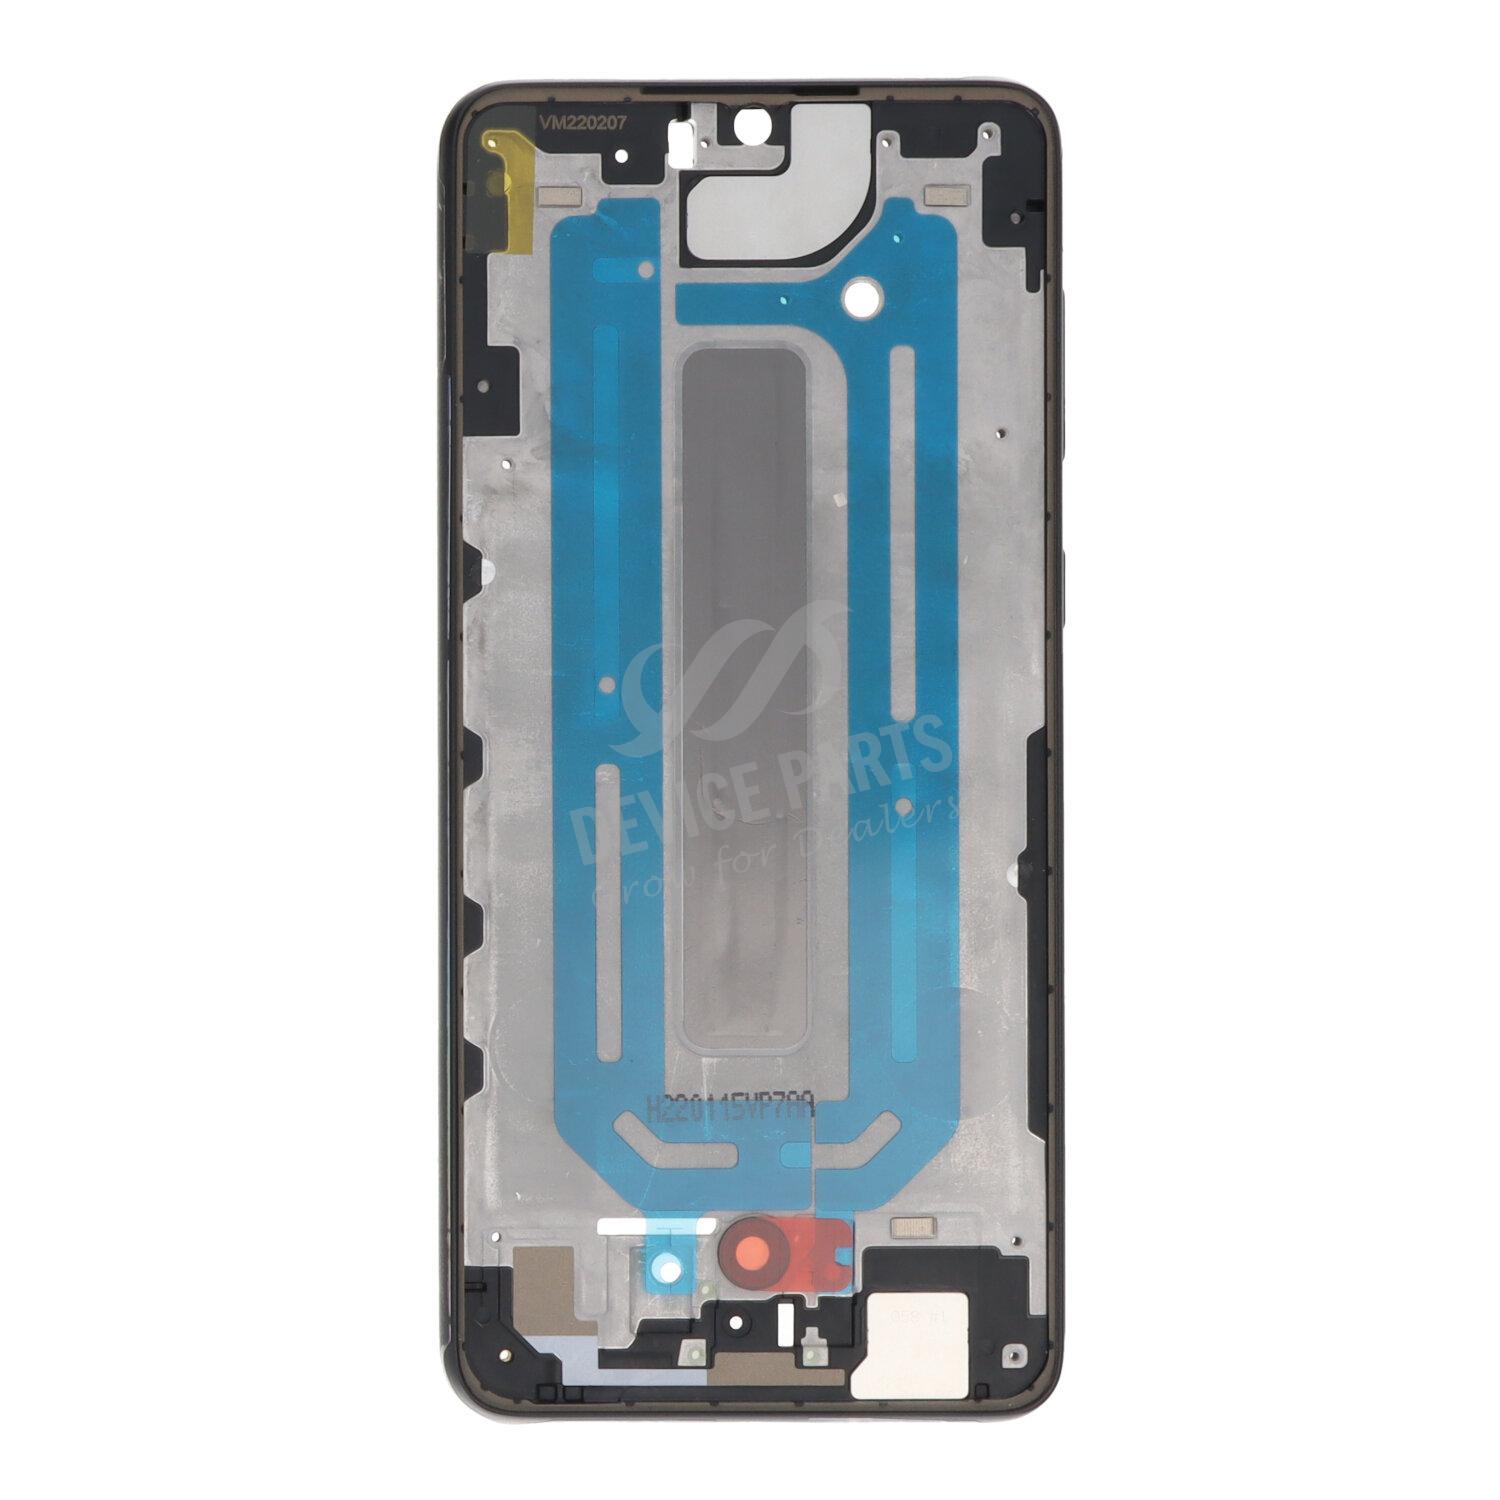 Marco frontal carcasa LCD frame housing cover Samsung Galaxy a3 & duos 